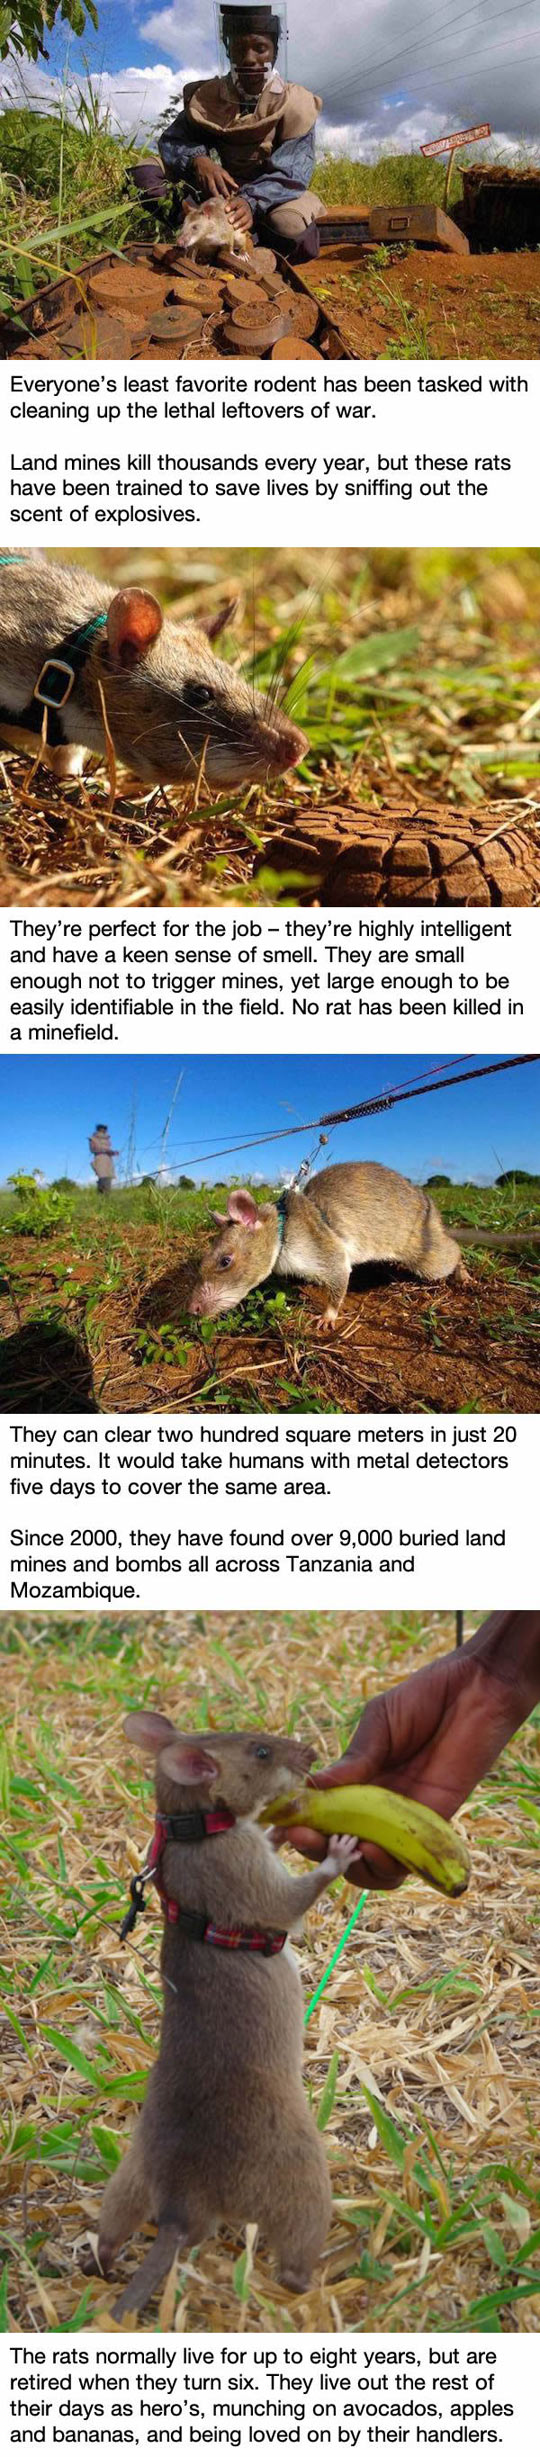 These Rats In Africa Are Saving Tons Of Lives